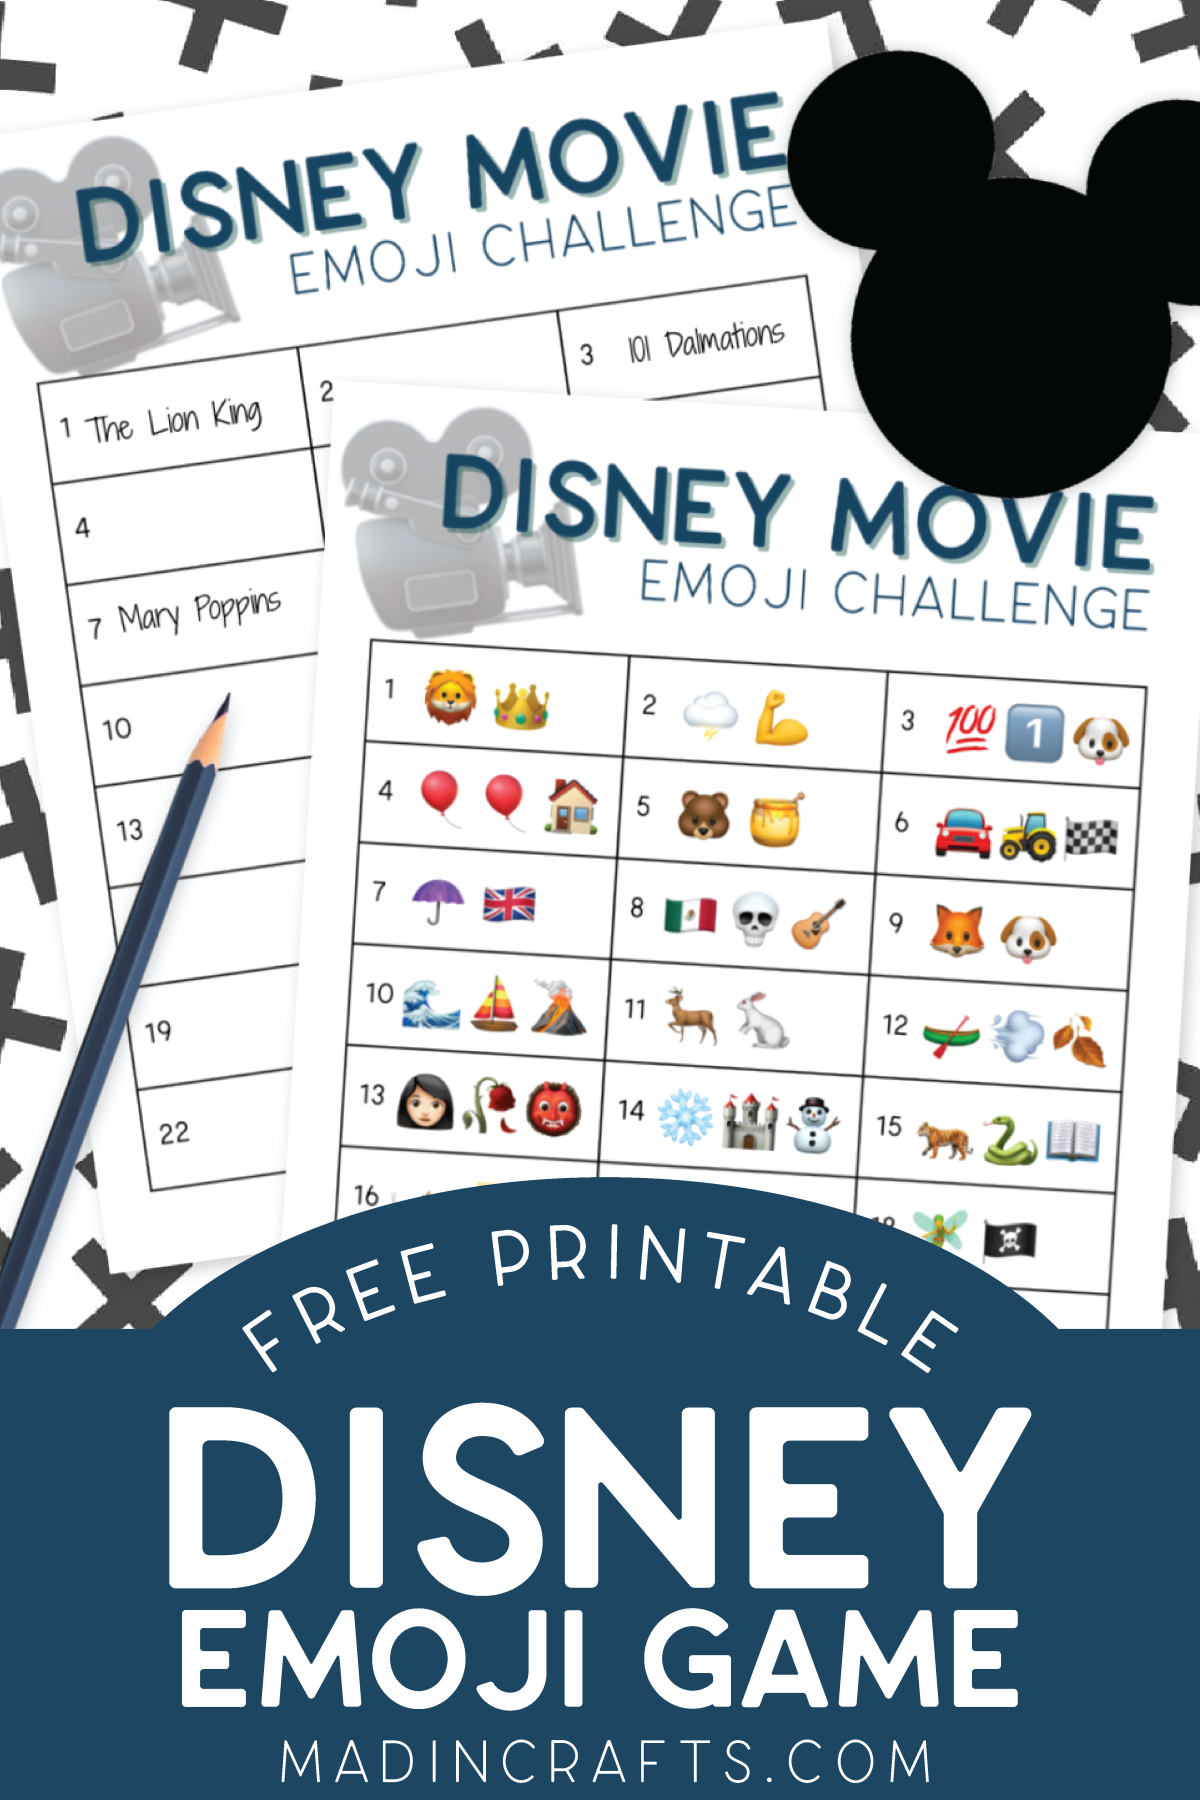 Two printables for a Disney emoji game on a patterned background